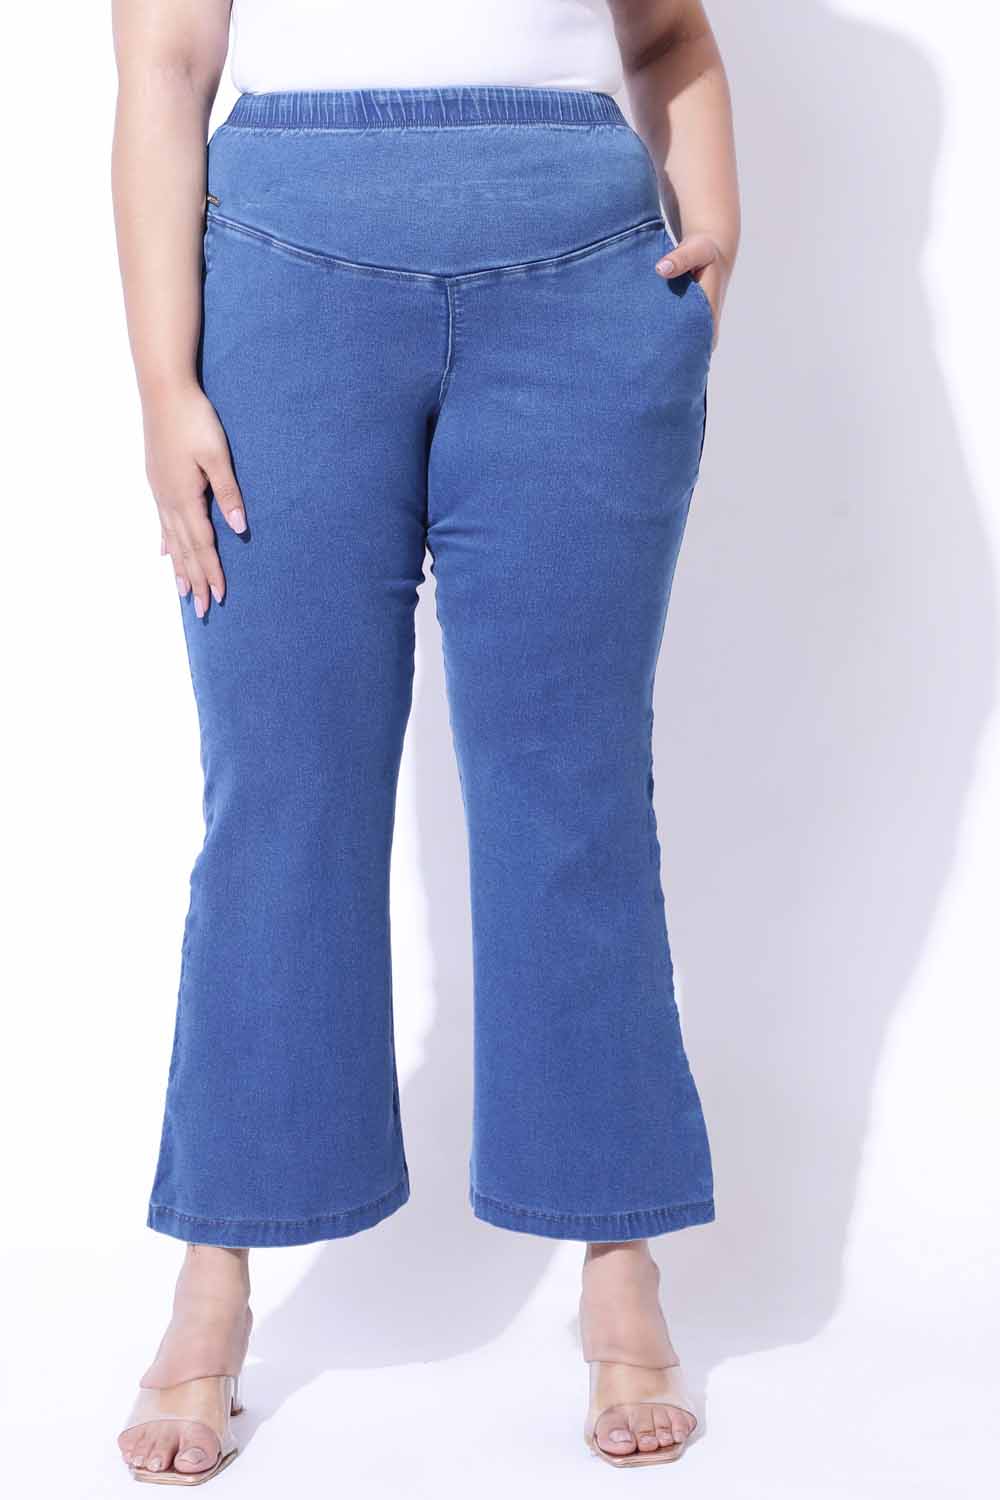 CL Womens Plus Size Blue Denim Stretch Crop Ripped Jeans Skinny Distressed  Pants (14) at  Women's Jeans store